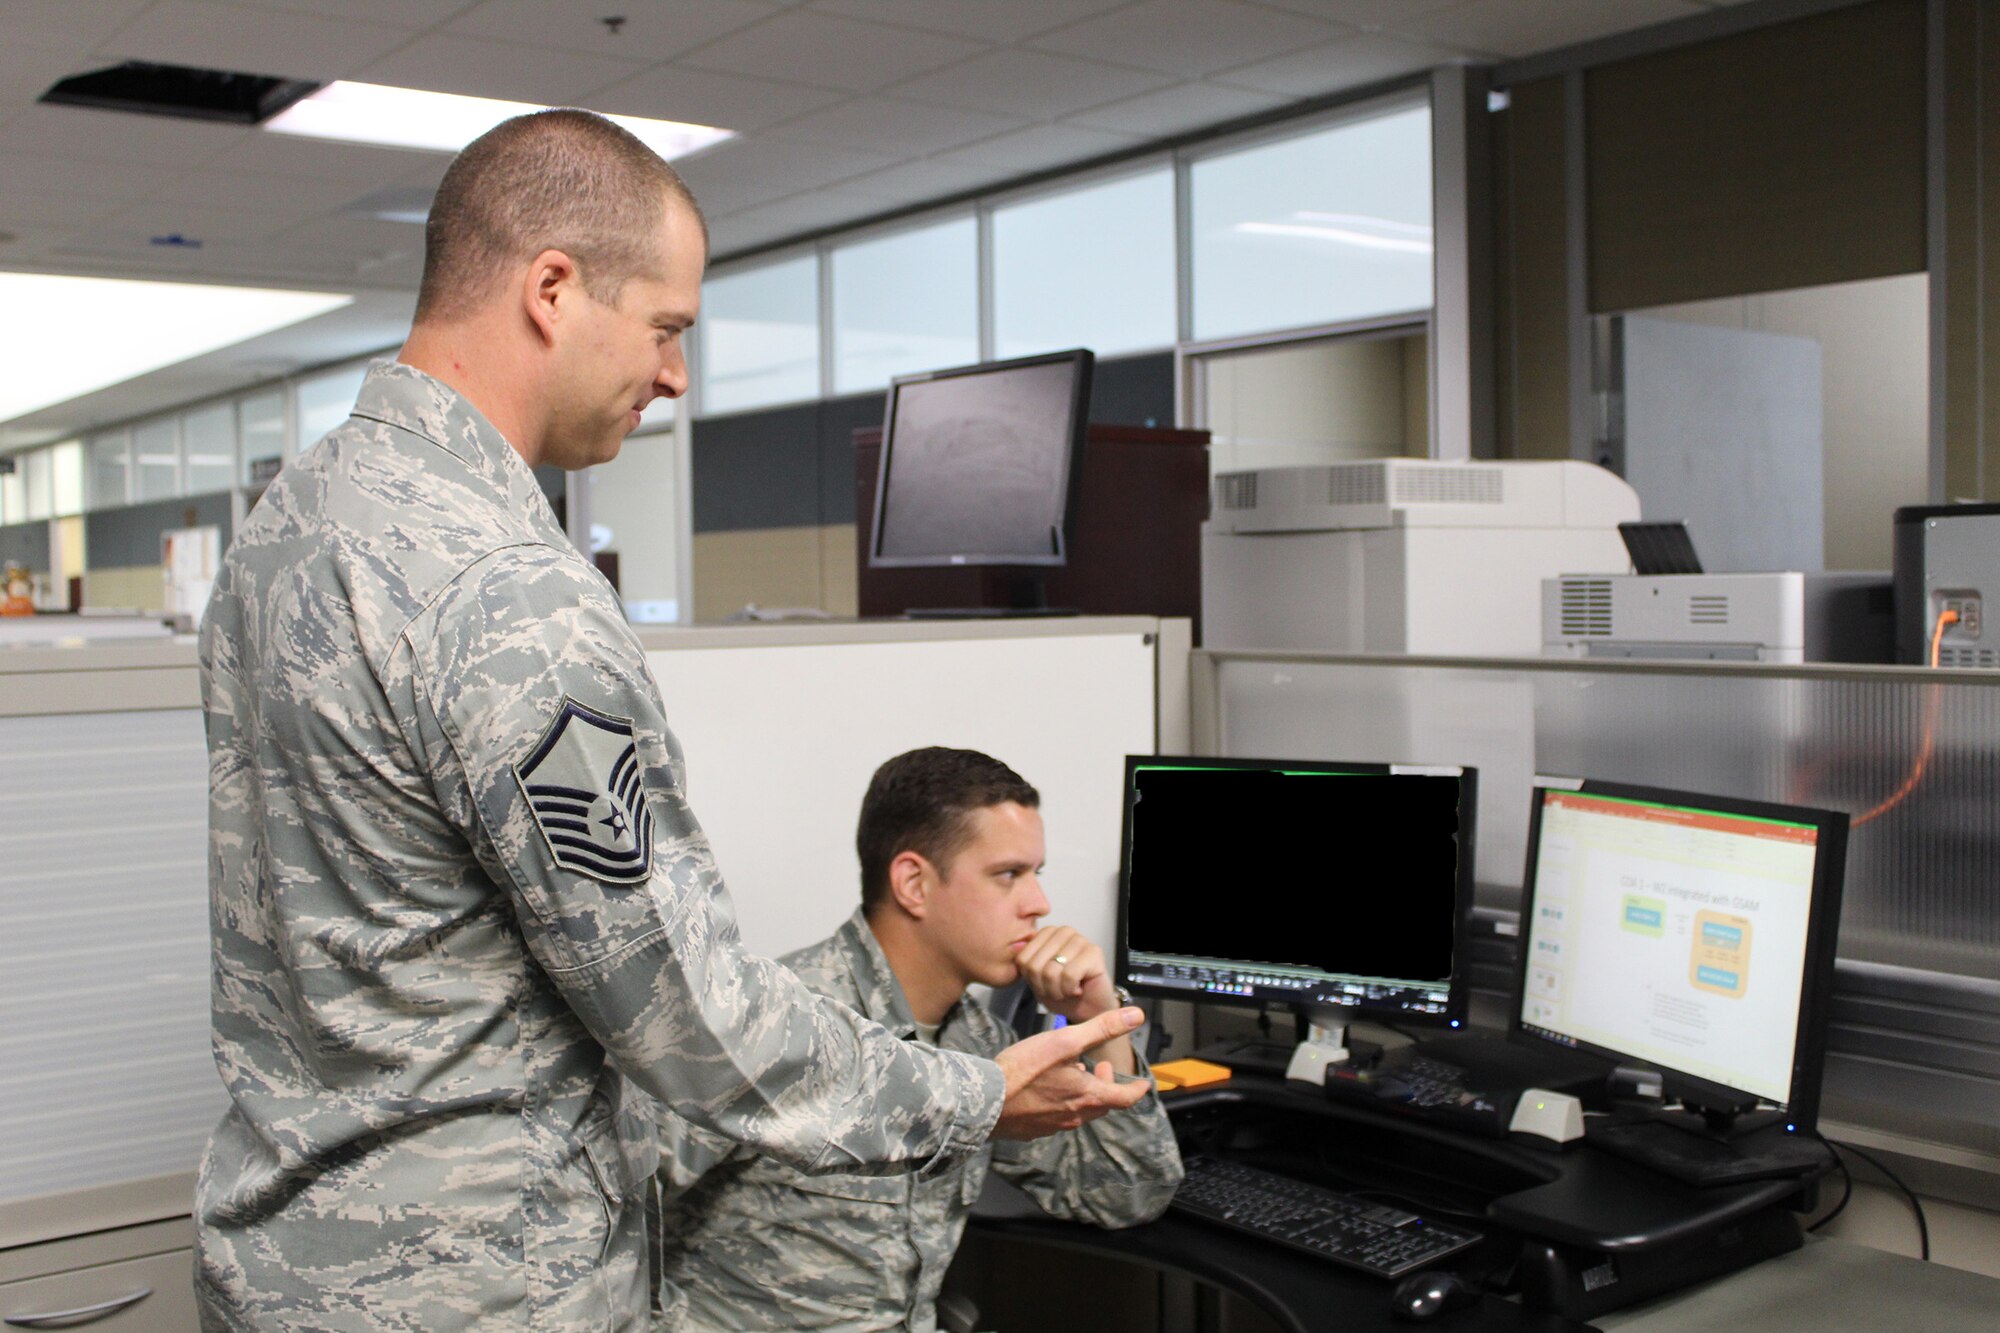 Master Sgt. David Meyers, 718th Intelligence Squadron, works with Staff Sgt. Pike Pemsteiner, 45th Intelligence Squadron, on the Gorgon Stare 2 sensor program.  Meyers was recommended to help the 45th IS with the GS 2 program because he had previous program management and training experience, to continue building the capability.